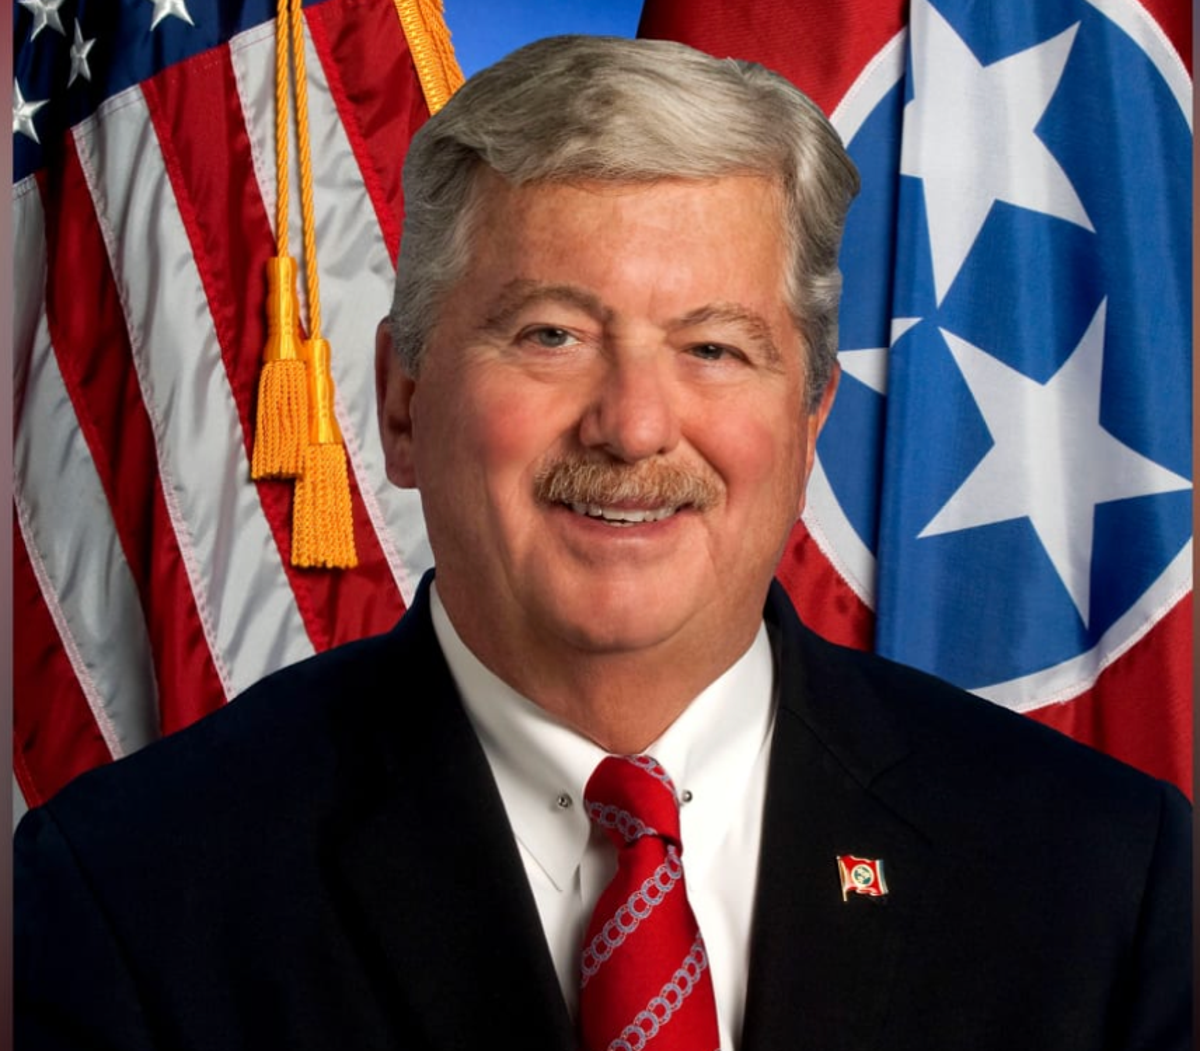 Tennessee lieutenant governor retires from social media after liking spicy gay photos